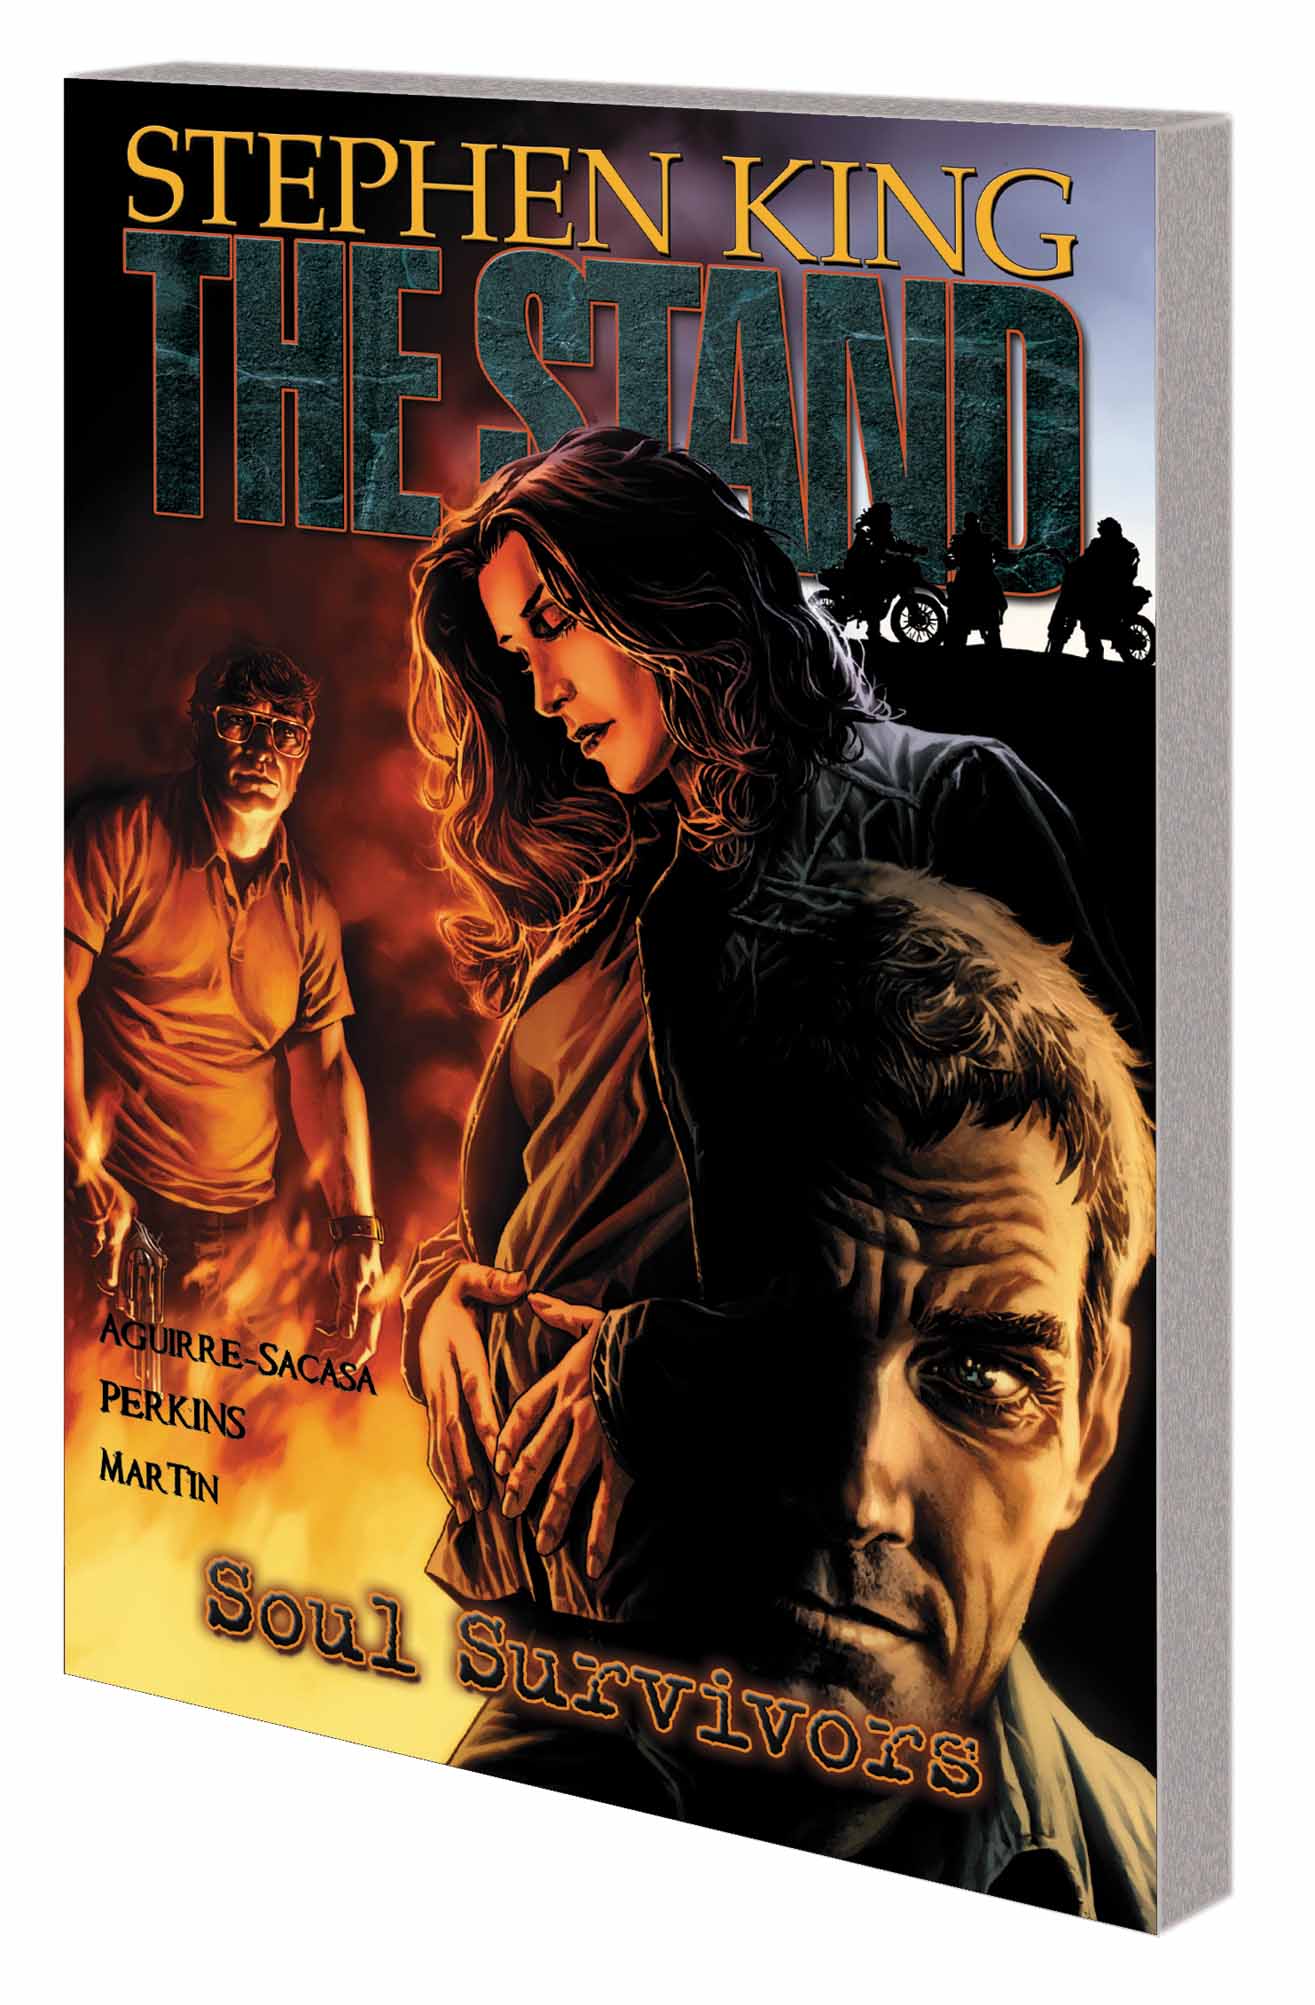 THE STAND VOL. 3: SOUL SURVIVORS TPB (Trade Paperback)